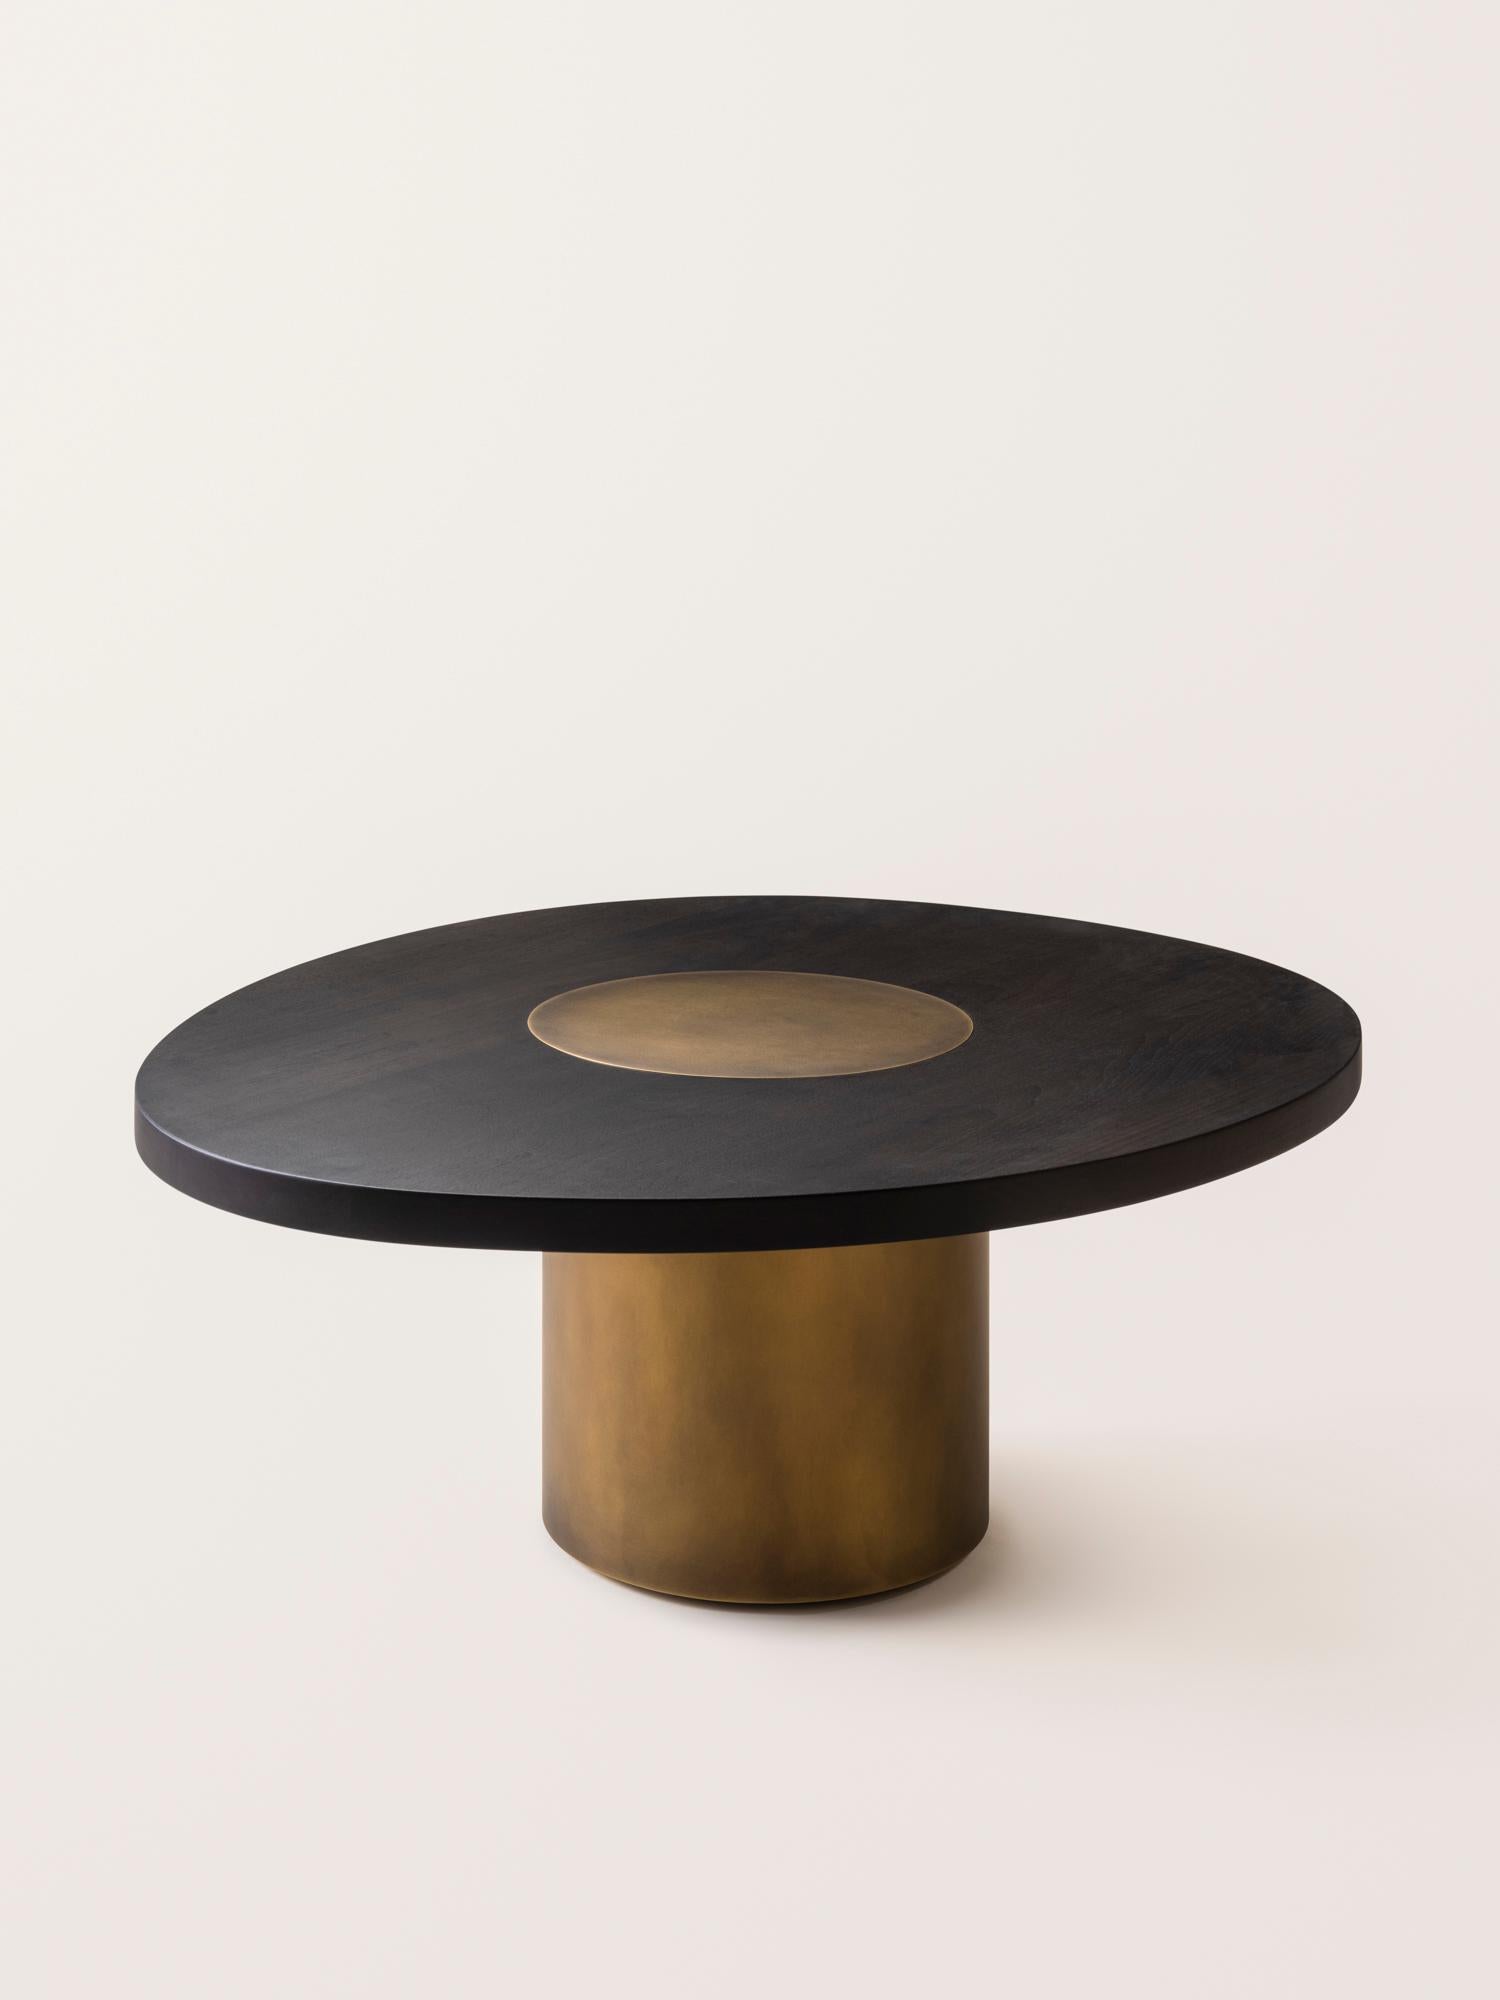 Inspired by the form and function of grain silos, the sculptural Silo Coffee Tables feature solid wood and hand-finished brass or stainless steel wrapped legs. The coffee tables are available in two height options and four sizes to allow for various